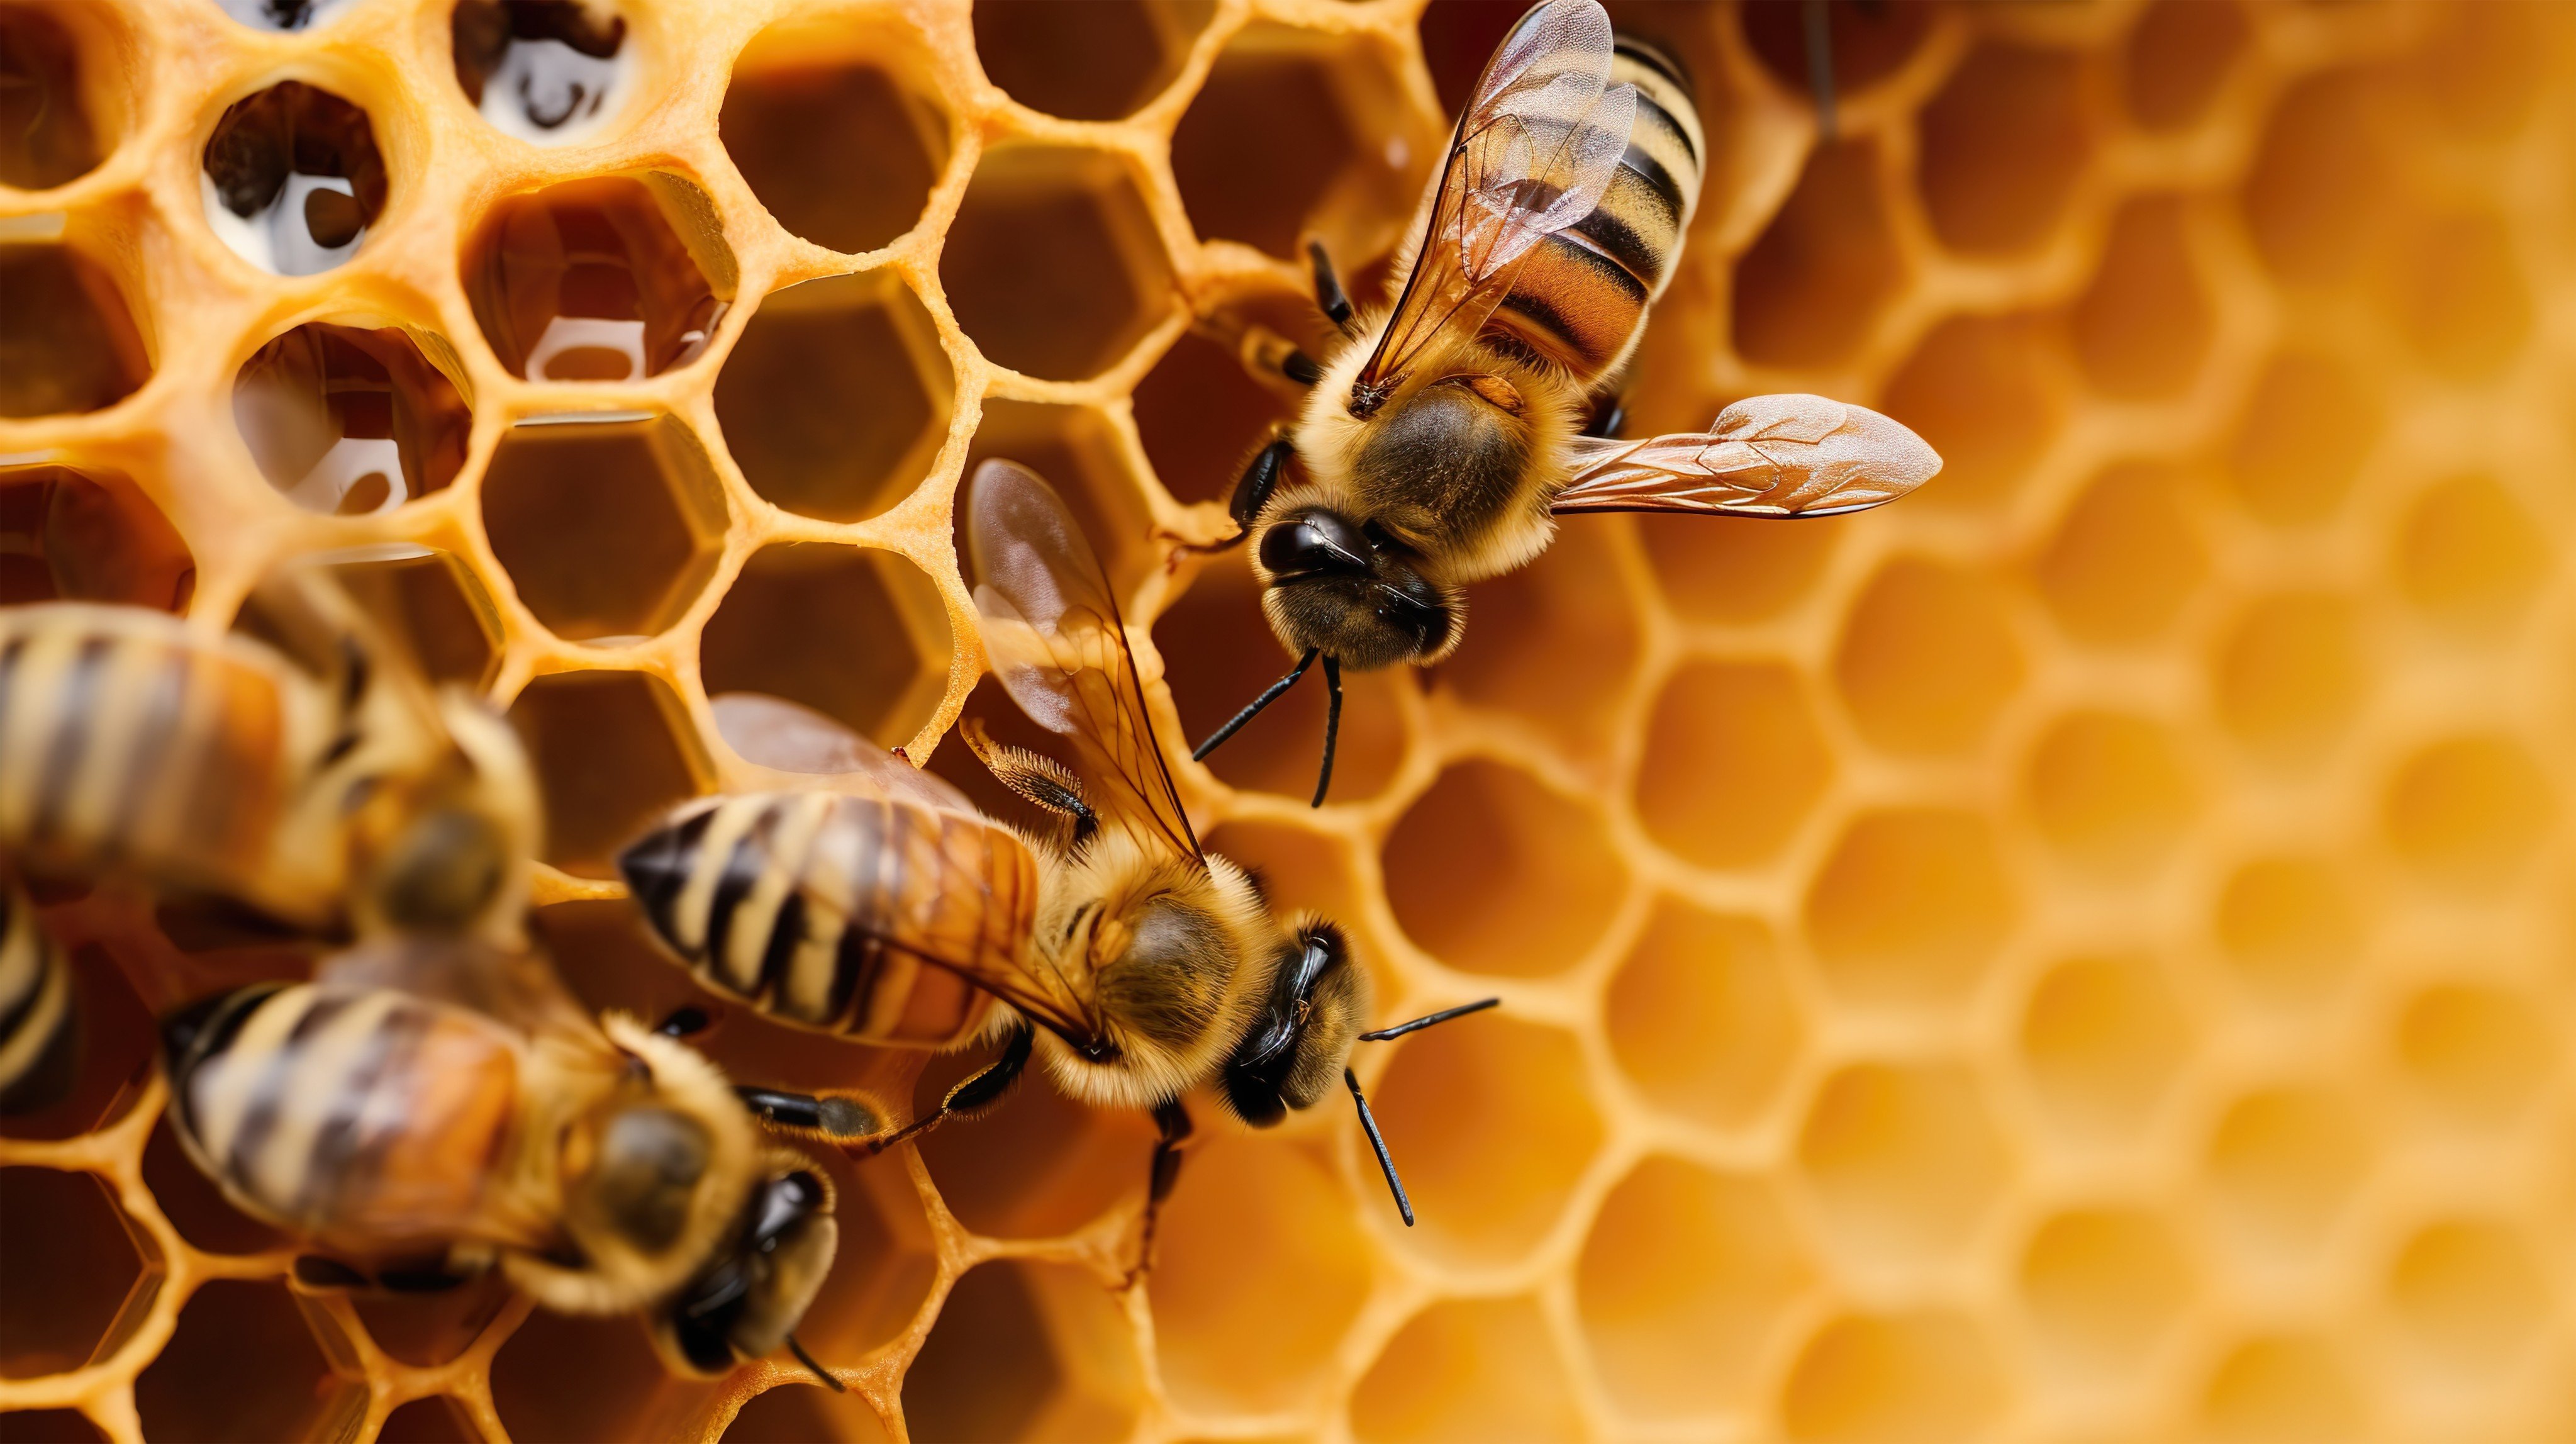 Tens of thousands of honeybees can live in a single hive. Photo: Shutterstock